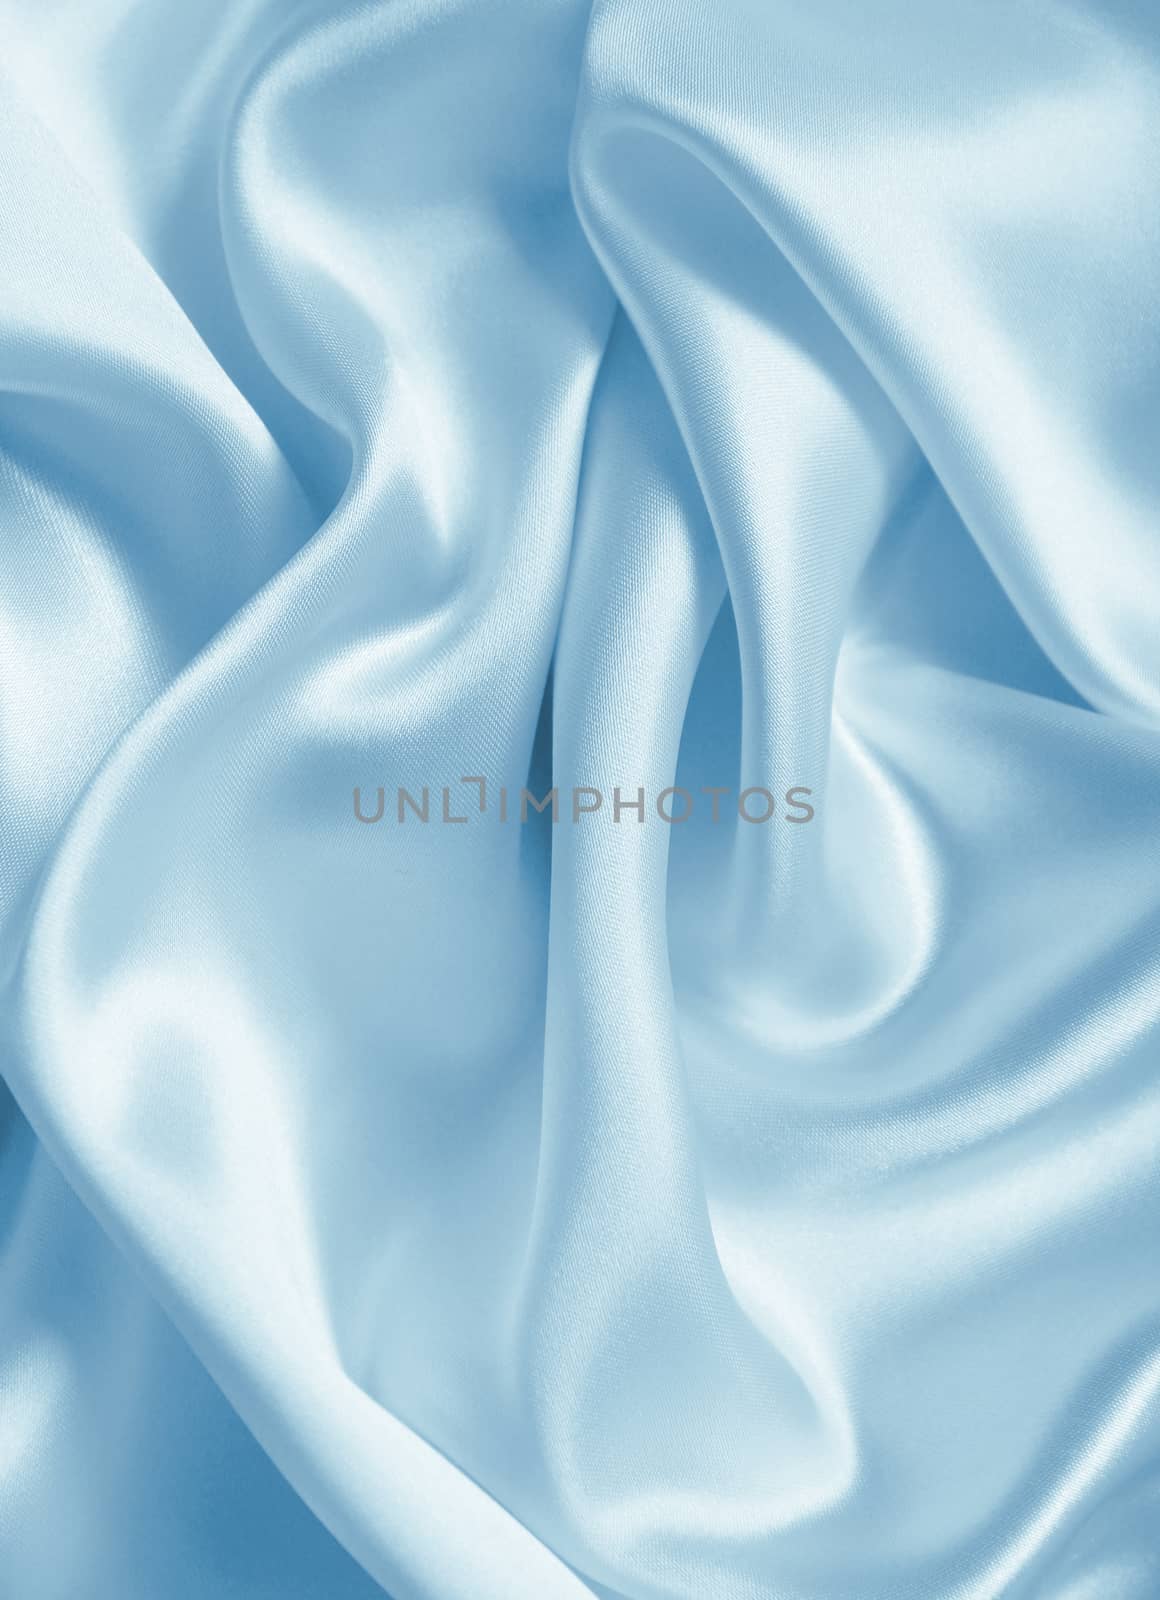 Smooth elegant blue silk or satin texture can use as background